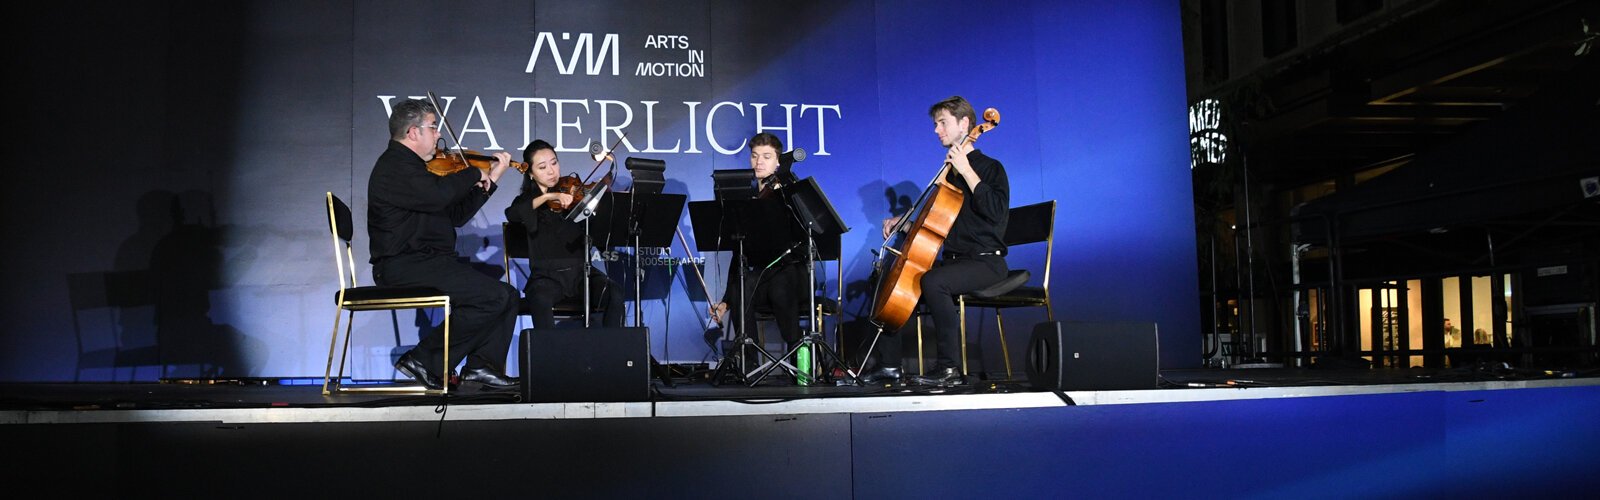 As part of the Arts in Motion WATERLICHT experience, a string quartet from The Florida Orchestra entertained the audience at Raybon Plaza on Sunday night, with classical pieces by Mozart, Bach and others.